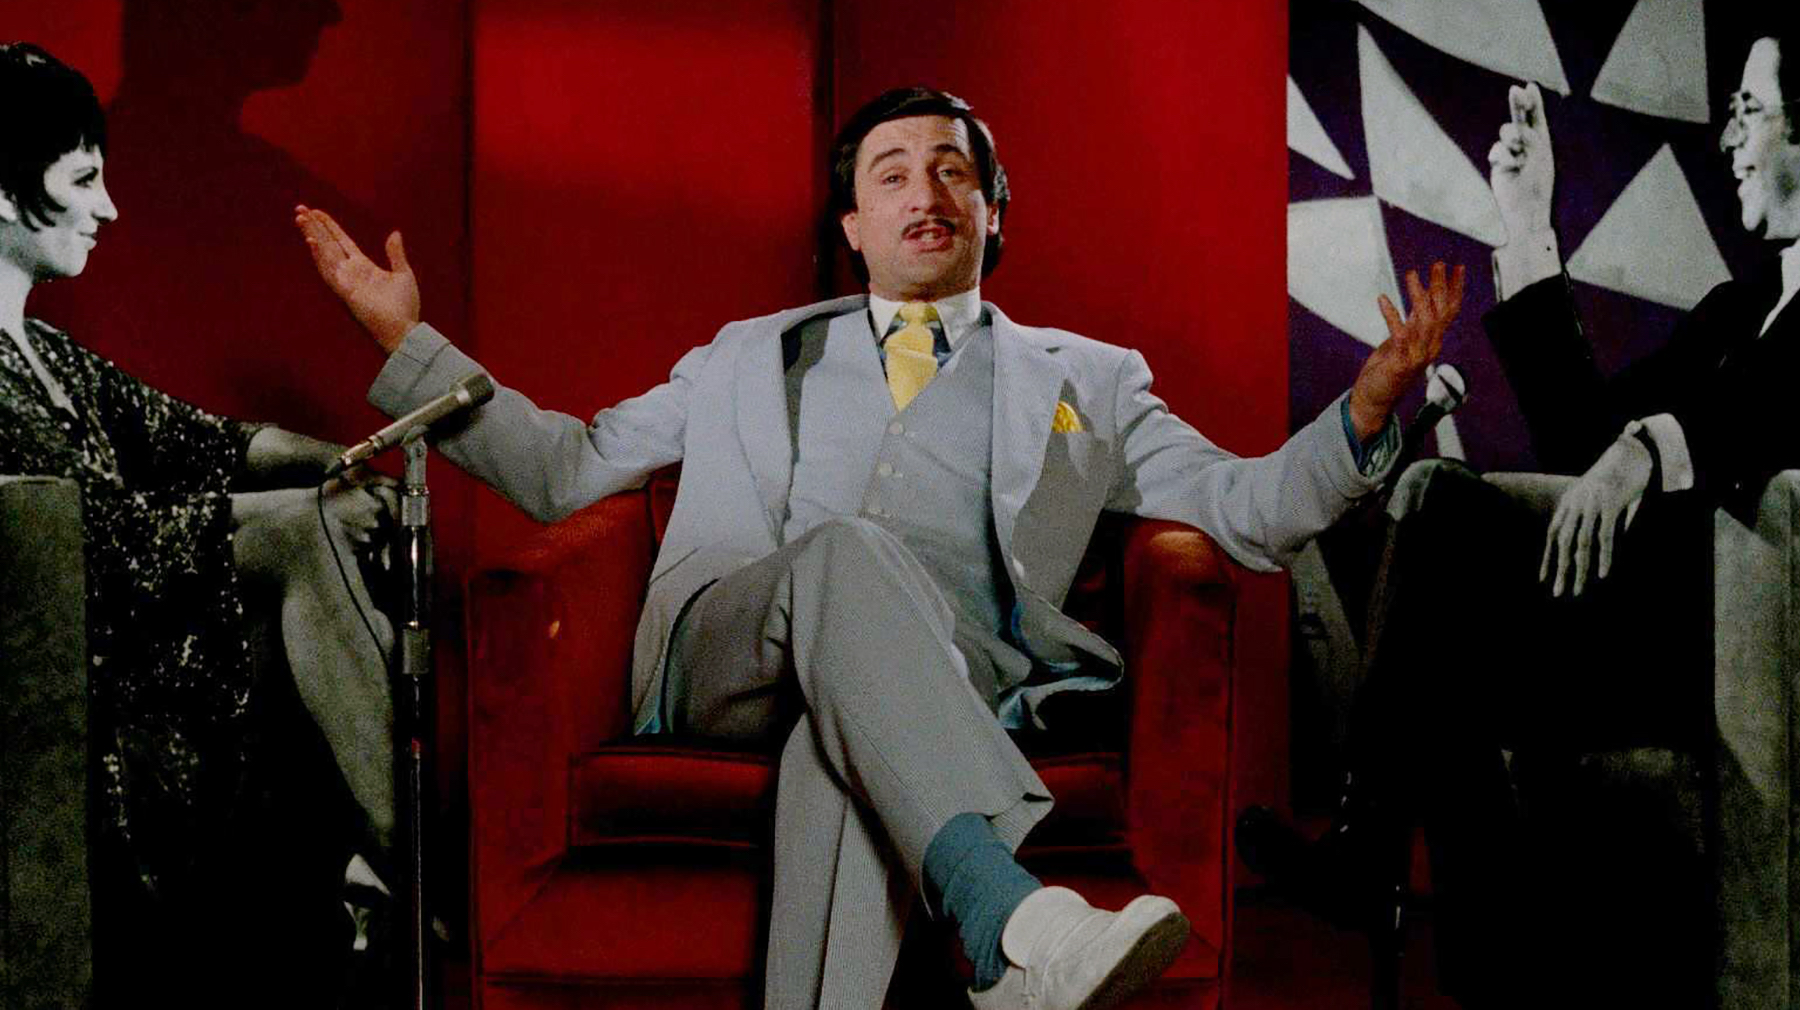 Robert De Niro and Jerry Lewis in The King of Comedy (1982)